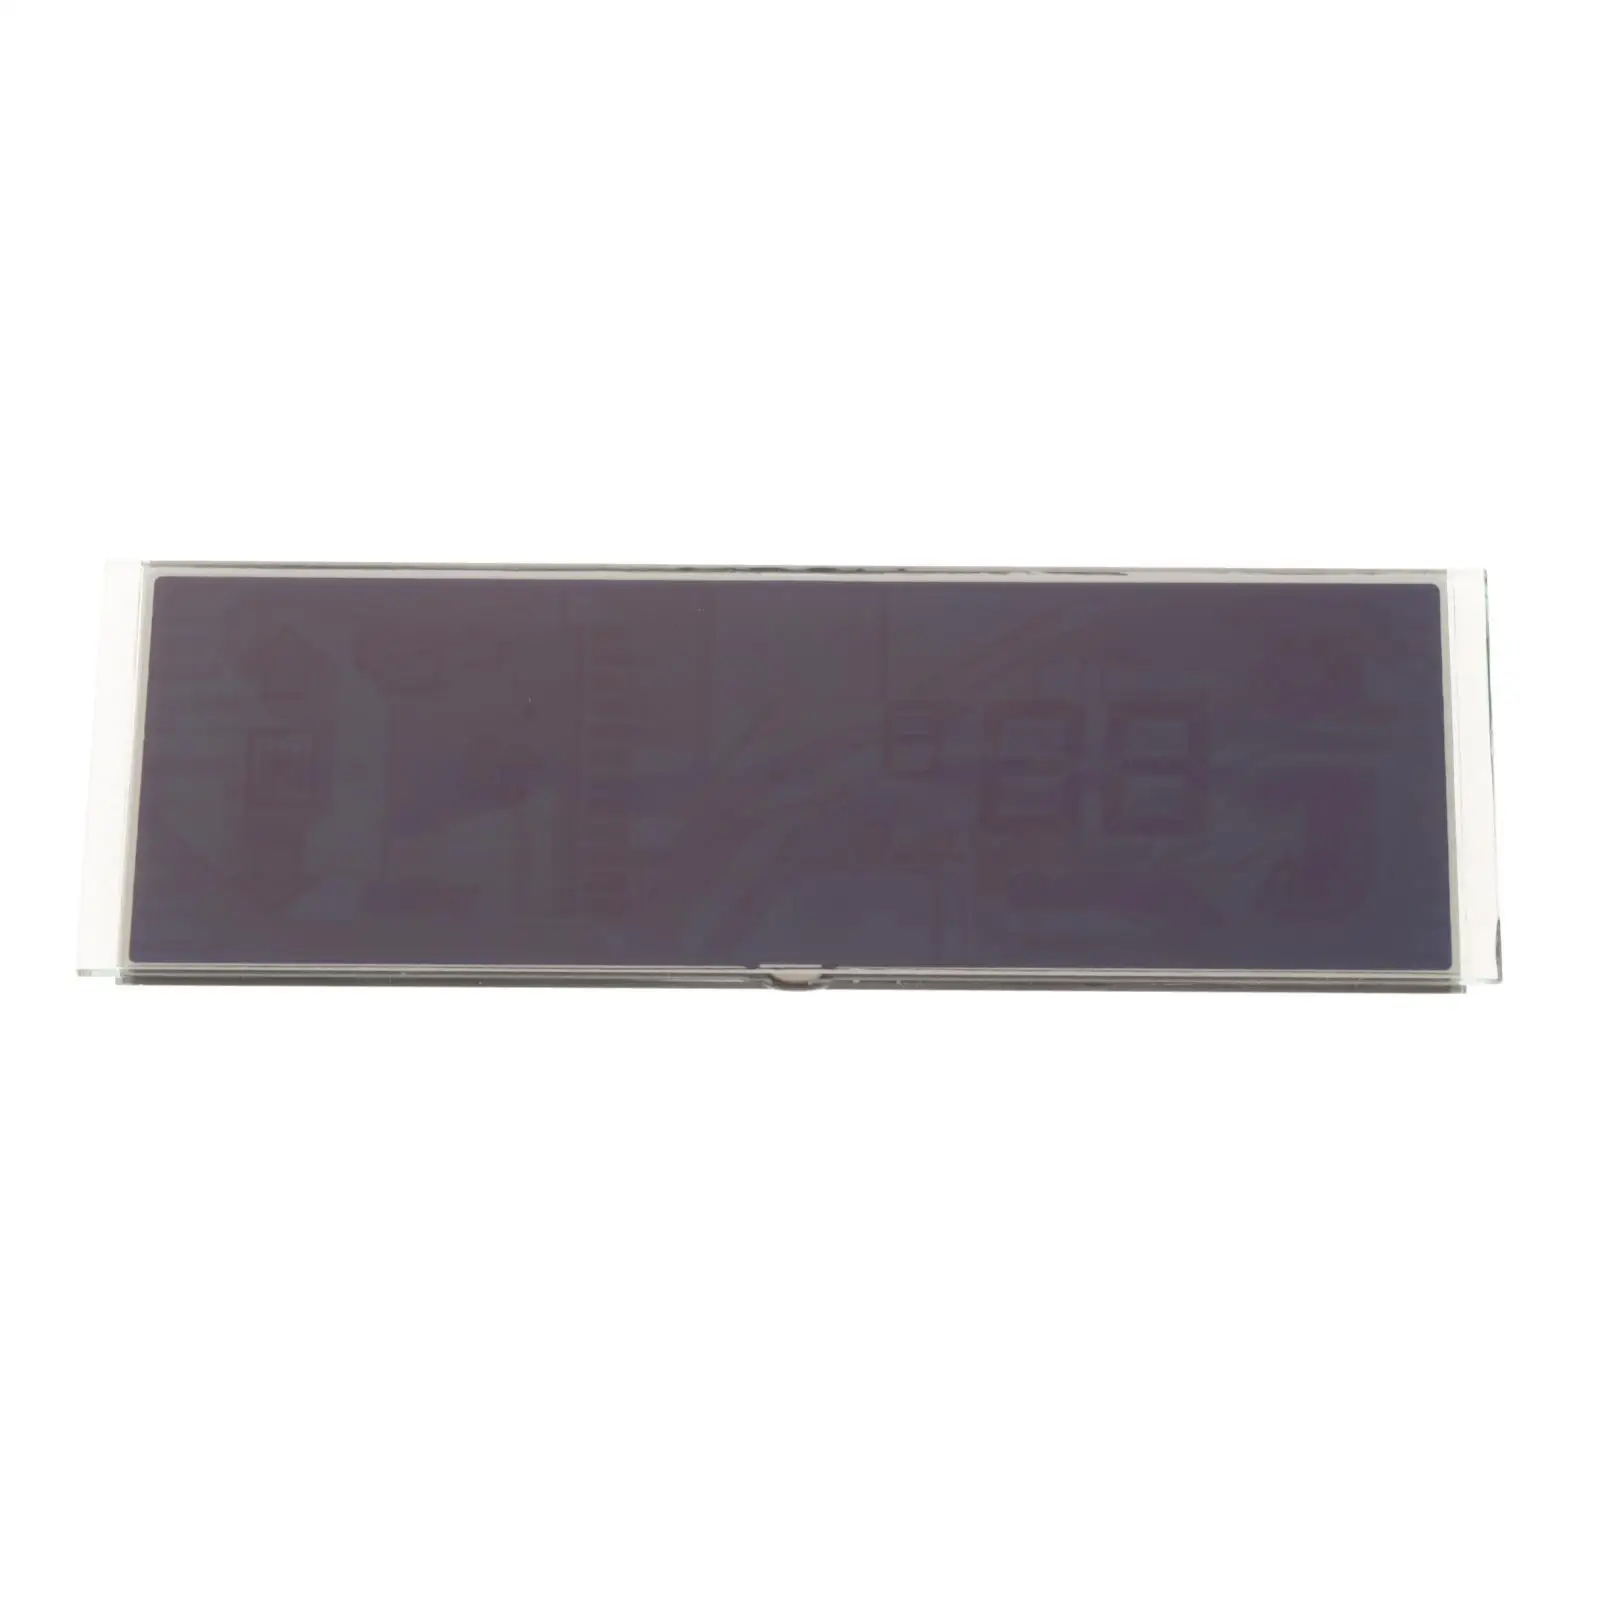 LCD Screen Repl ement Display Fits for 911 9997-2006 ,Ruf2002 ,  Heater Temperature Unit Ruf 3400 S